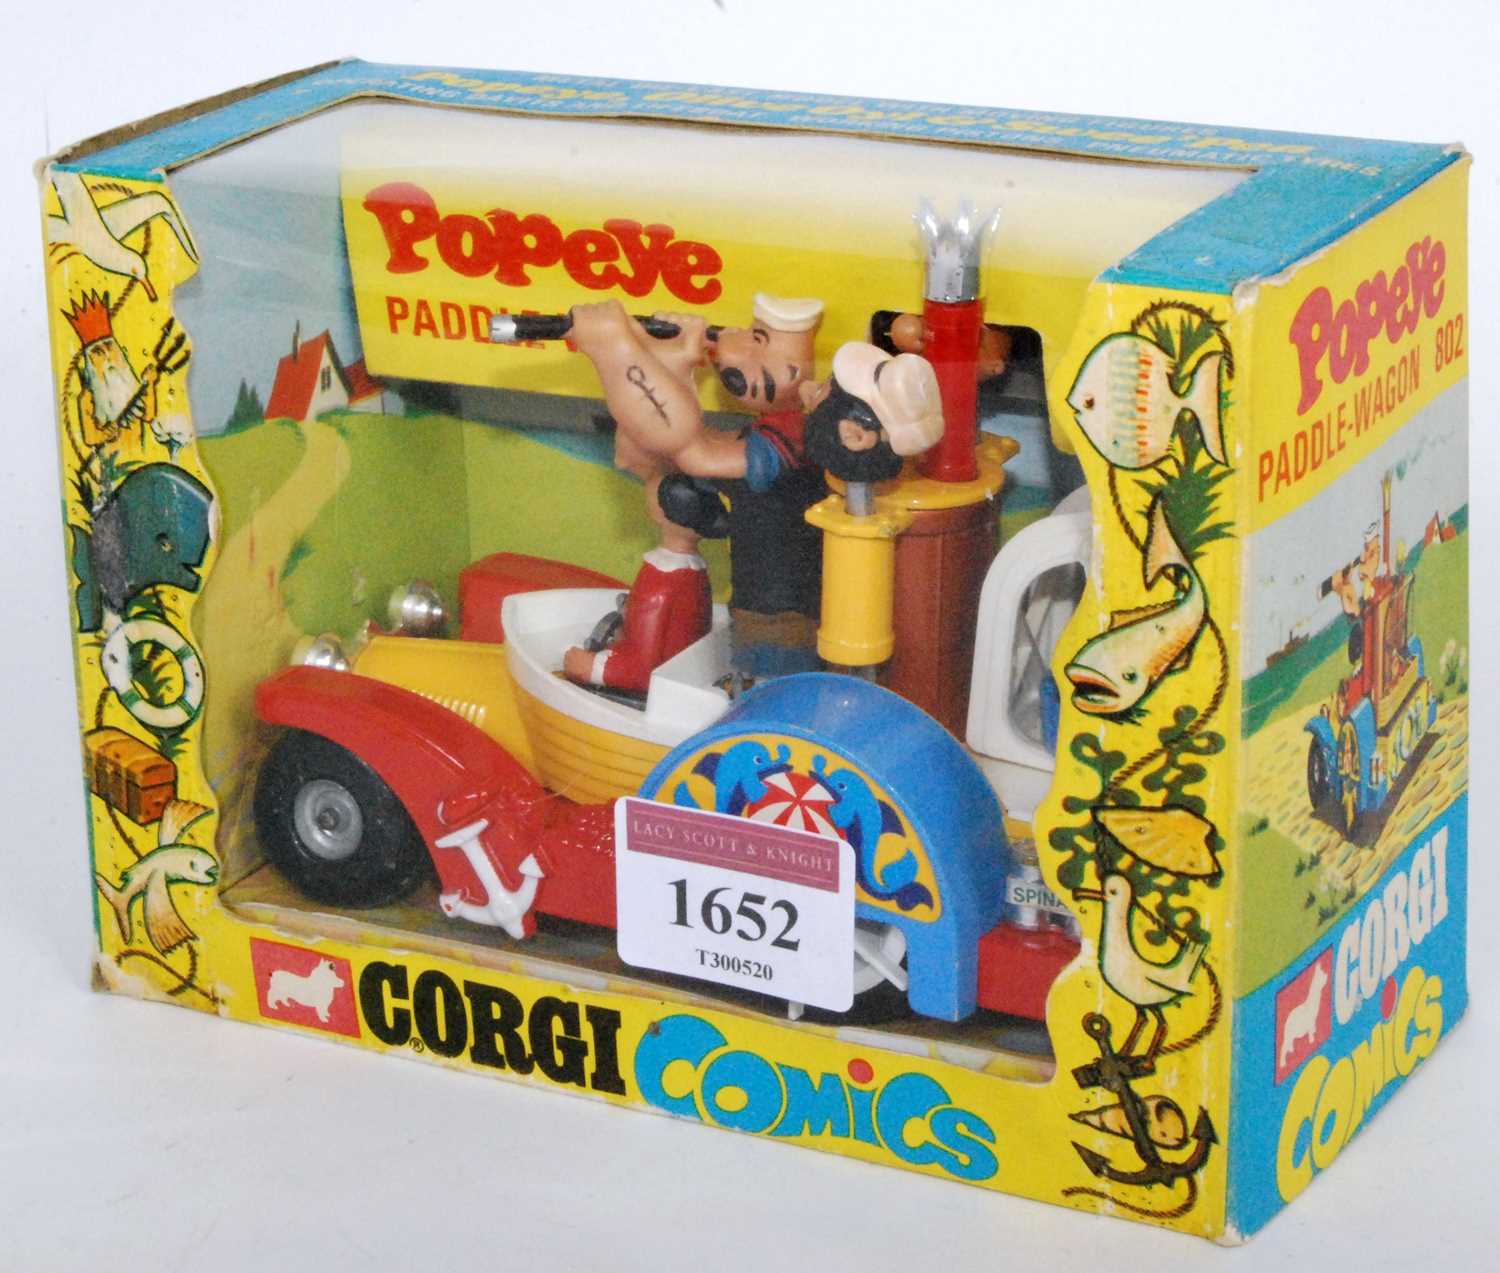 A Corgi Toys No. 802 Popeye's Paddle Wagon, finished in yellow with red chassis, white upper body - Image 2 of 3